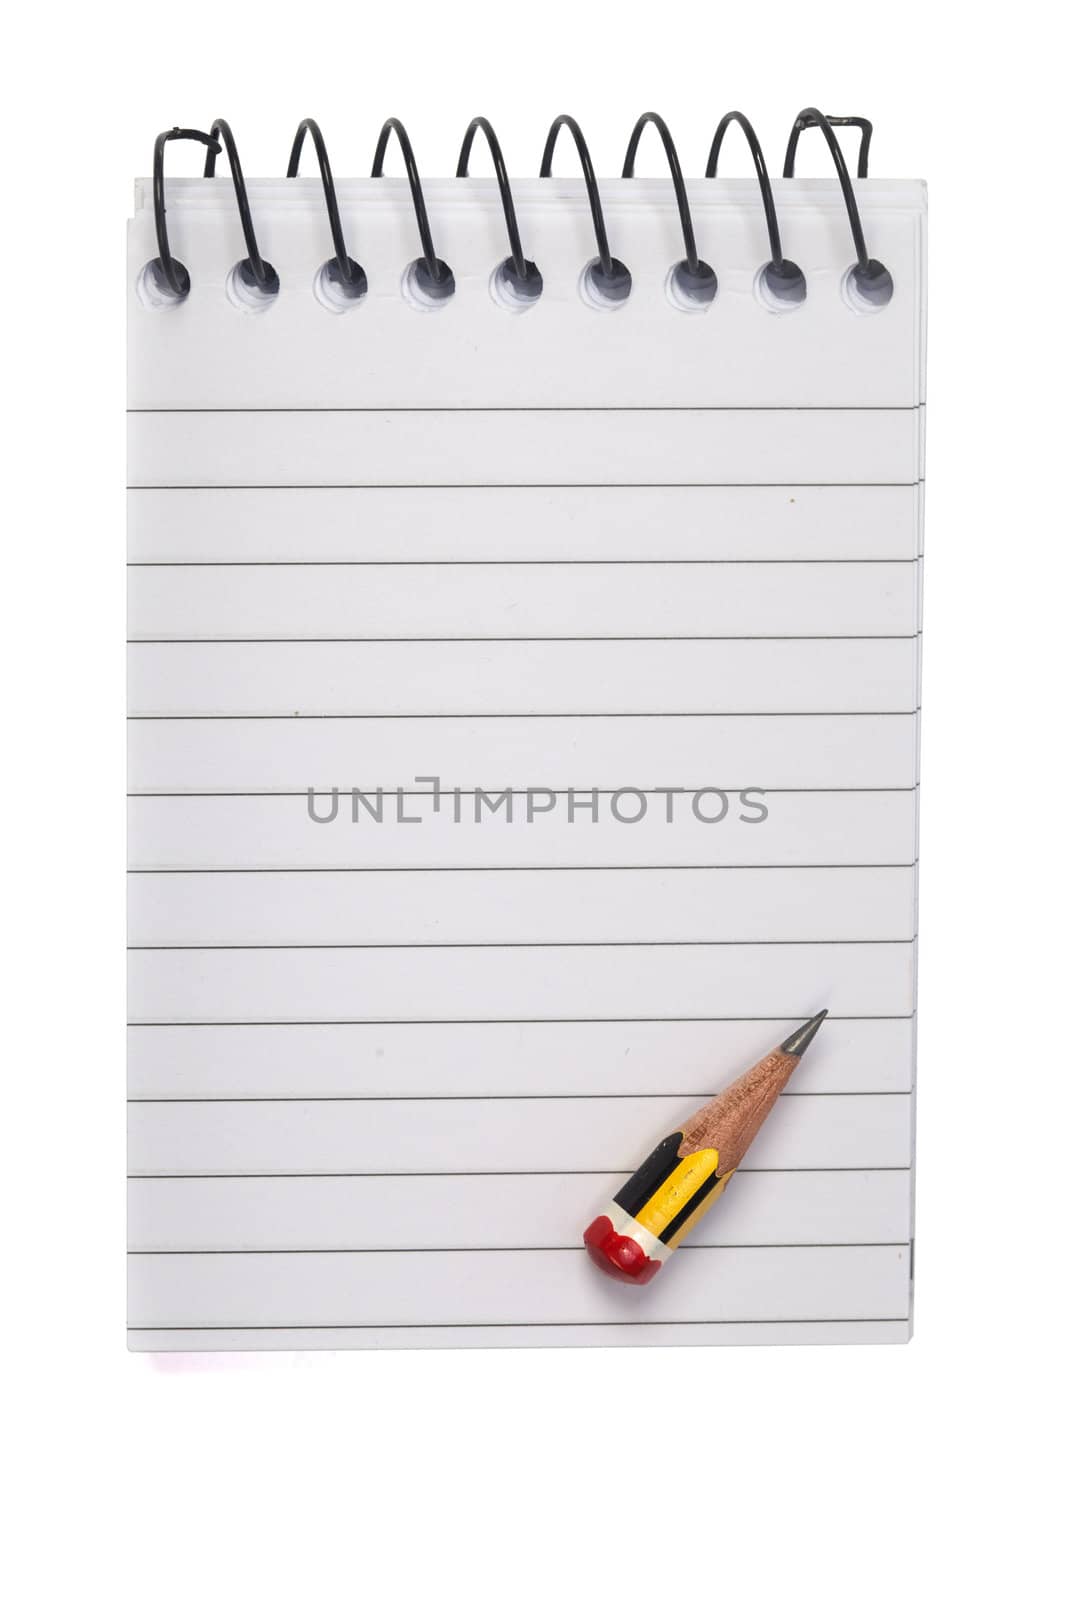 A small and very sharp pencil on a notepad, isolated on a white background.